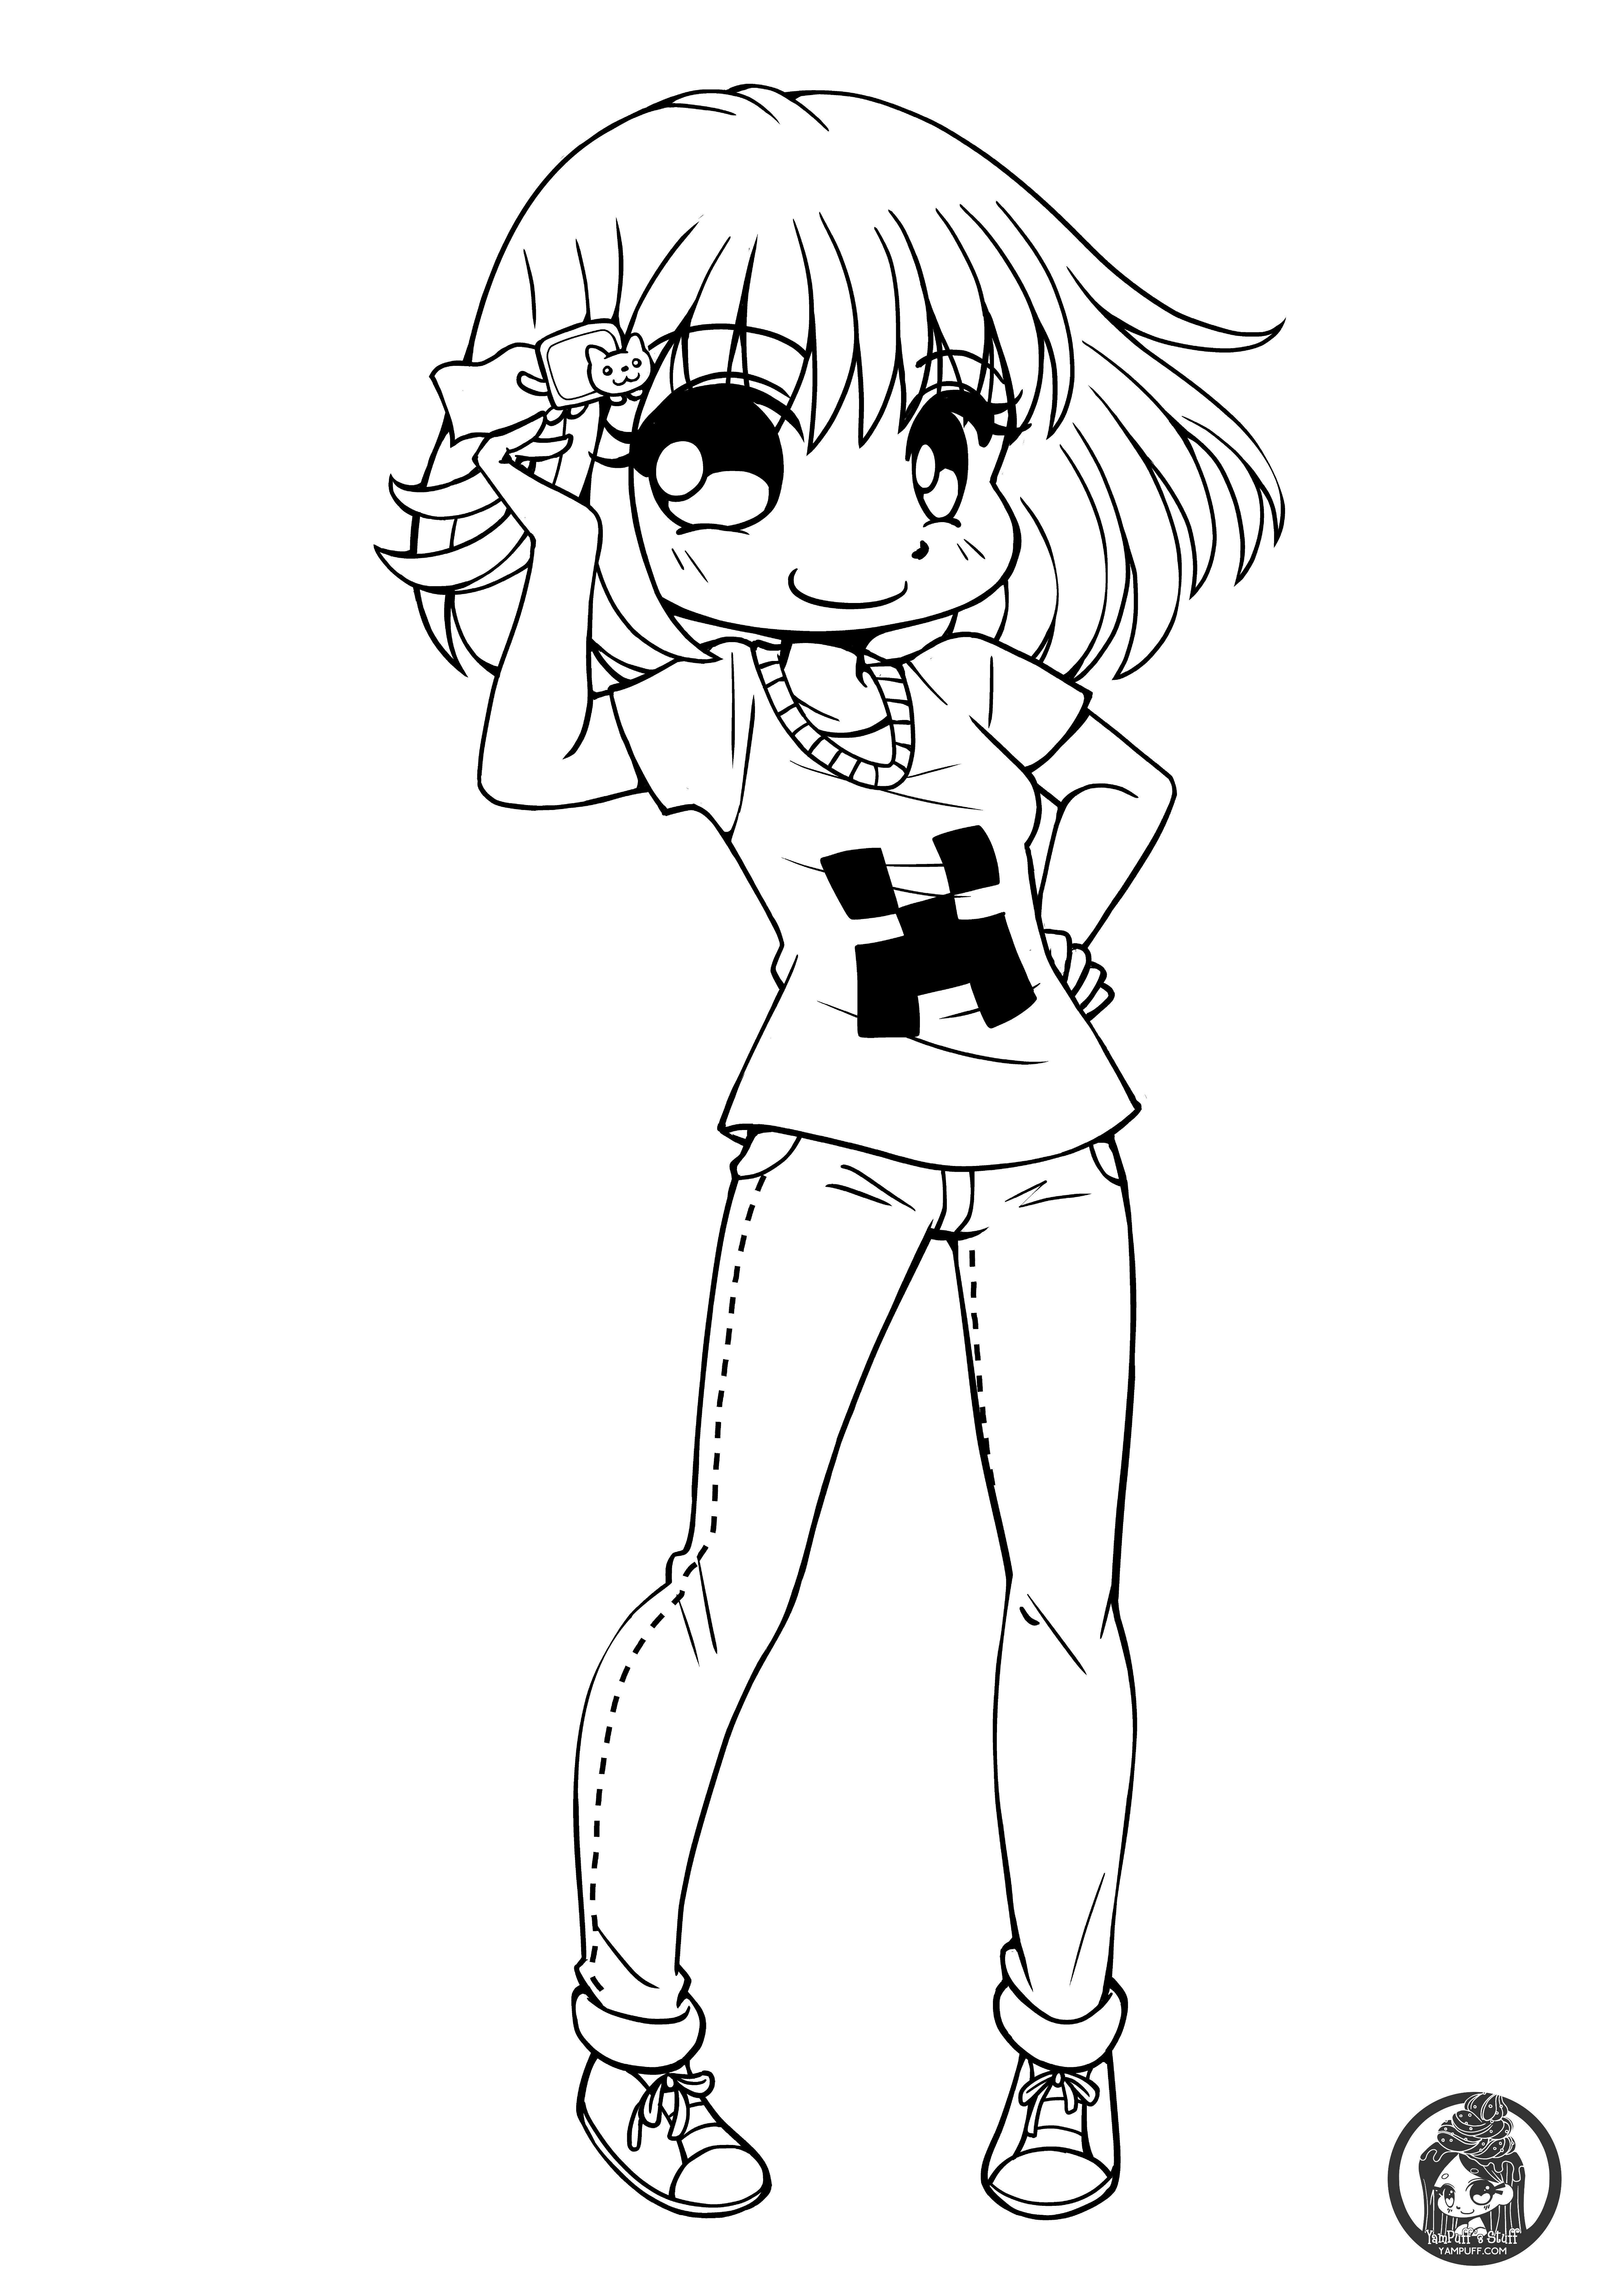 Chibi Coloring Pages With Three Girls
 Chibis Free Chibi Coloring Pages • YamPuff s Stuff